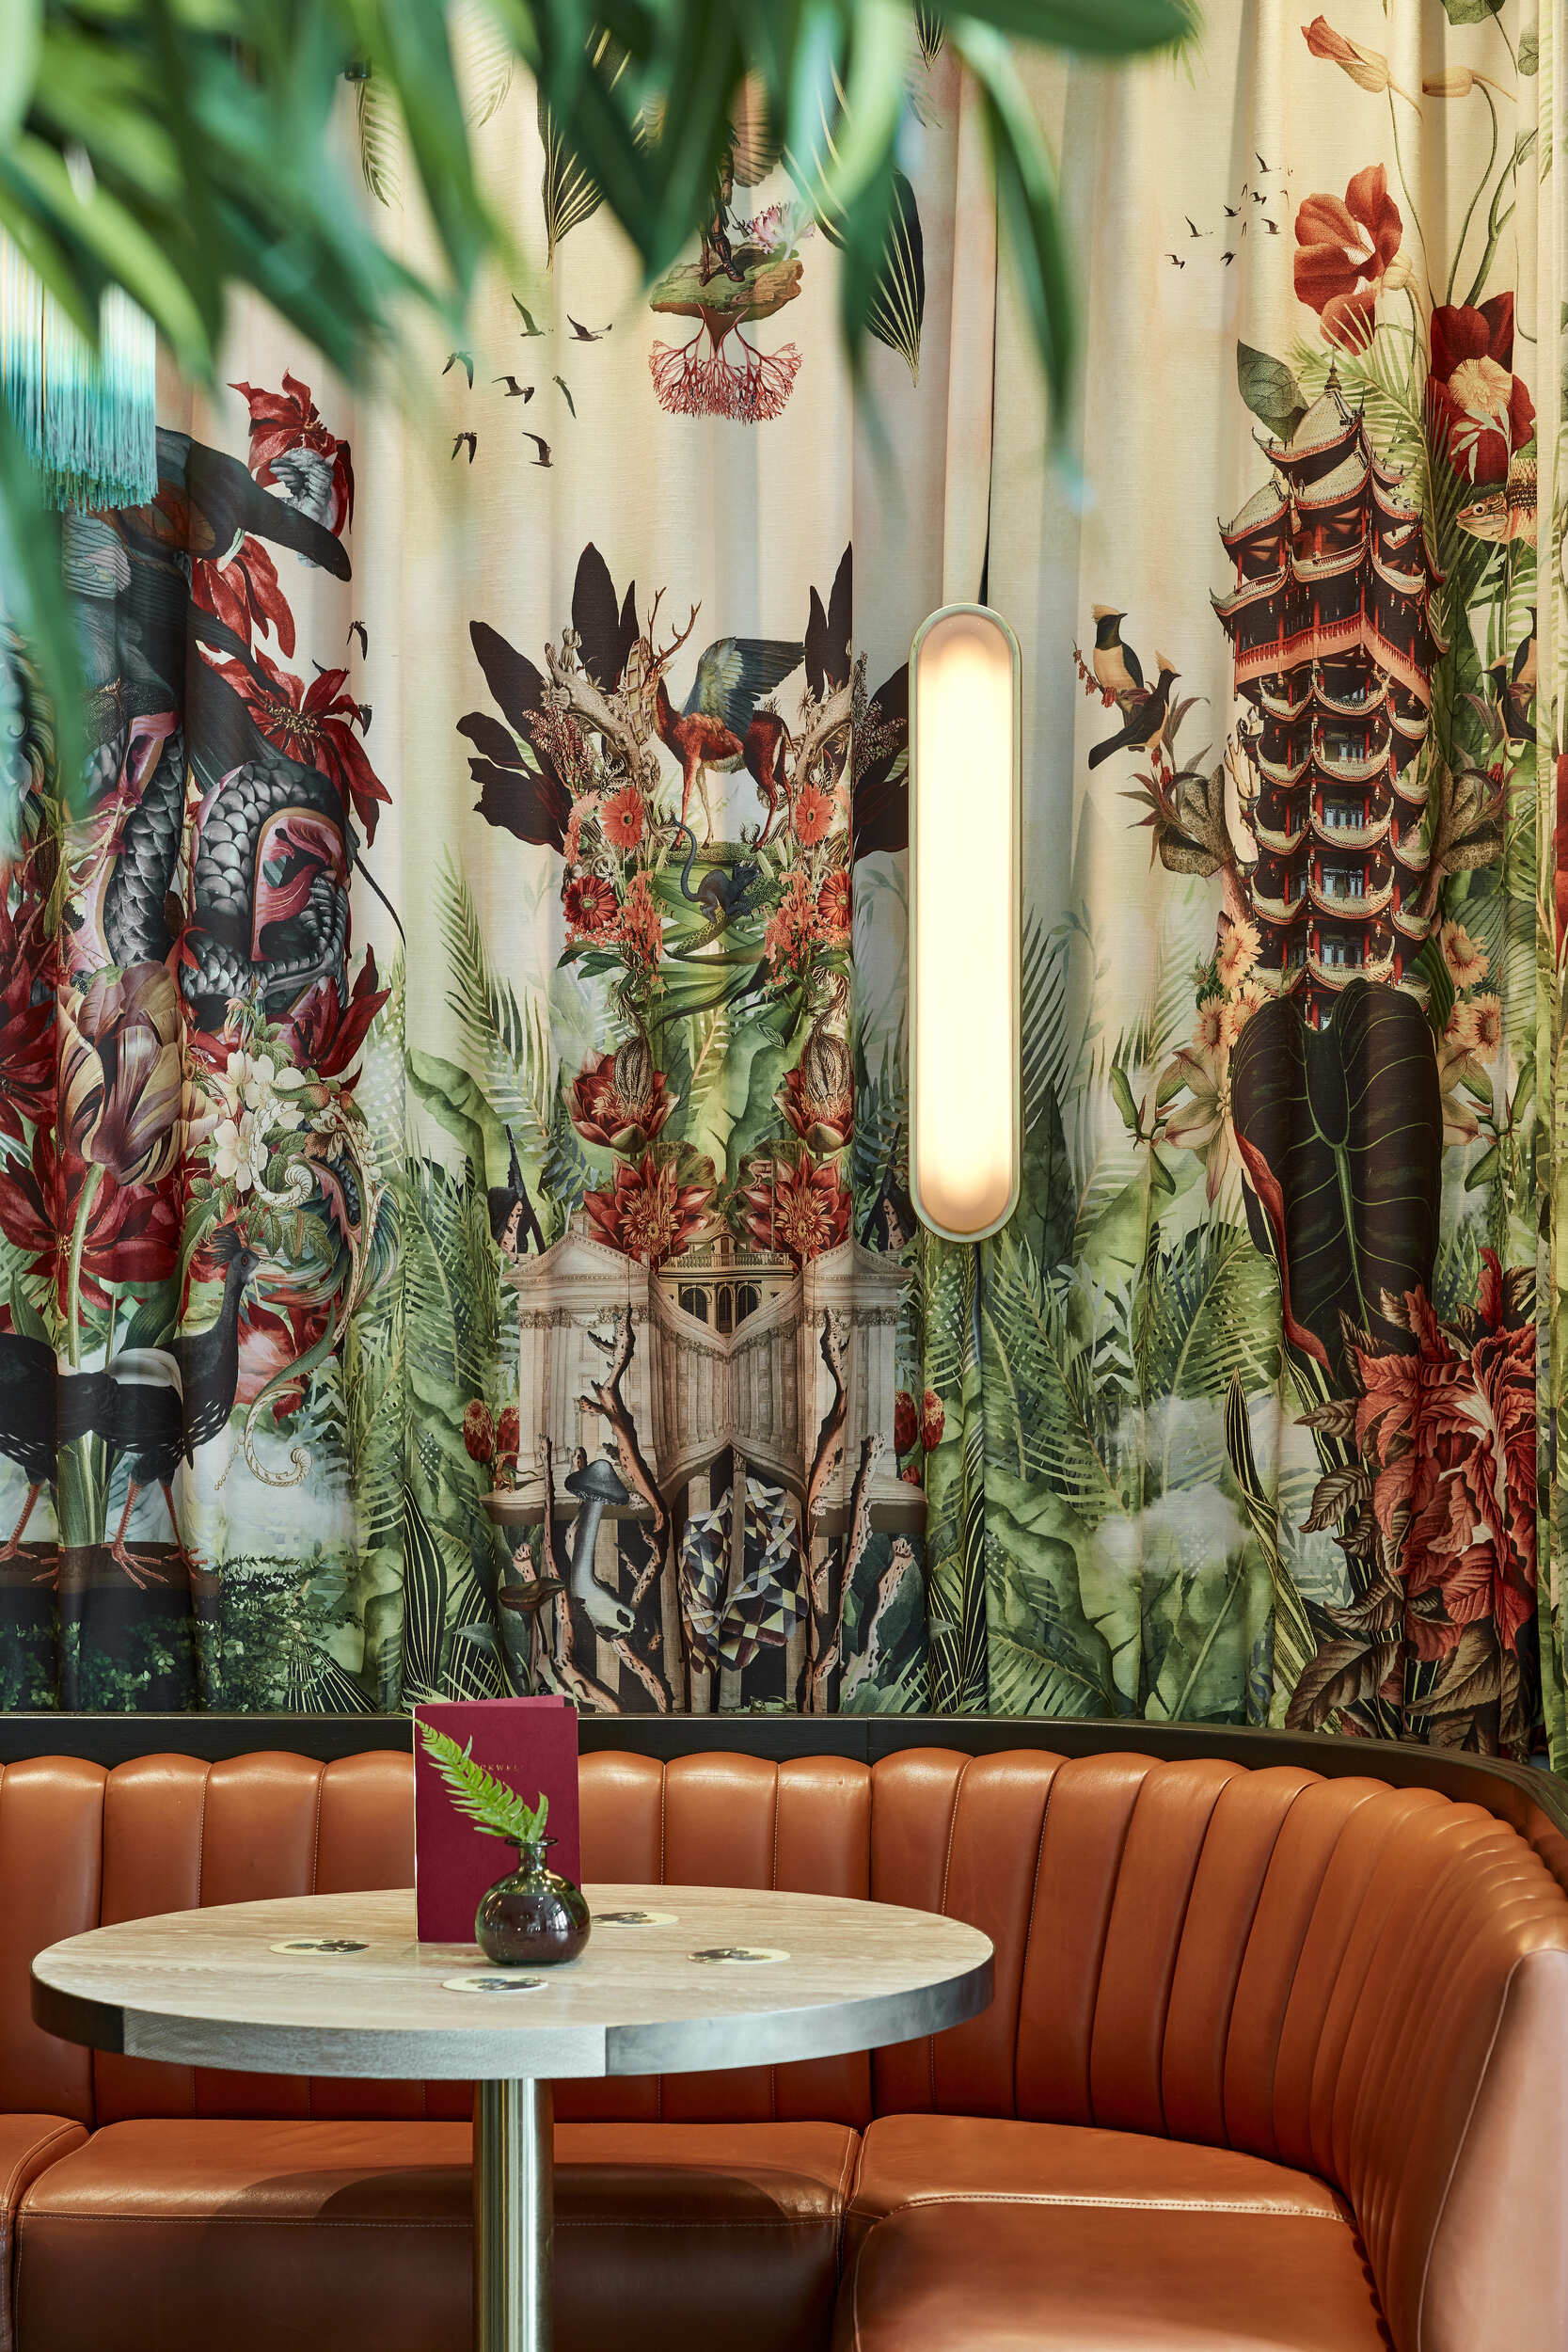 Bespoke fabric walls in cocktail bar with leather seating